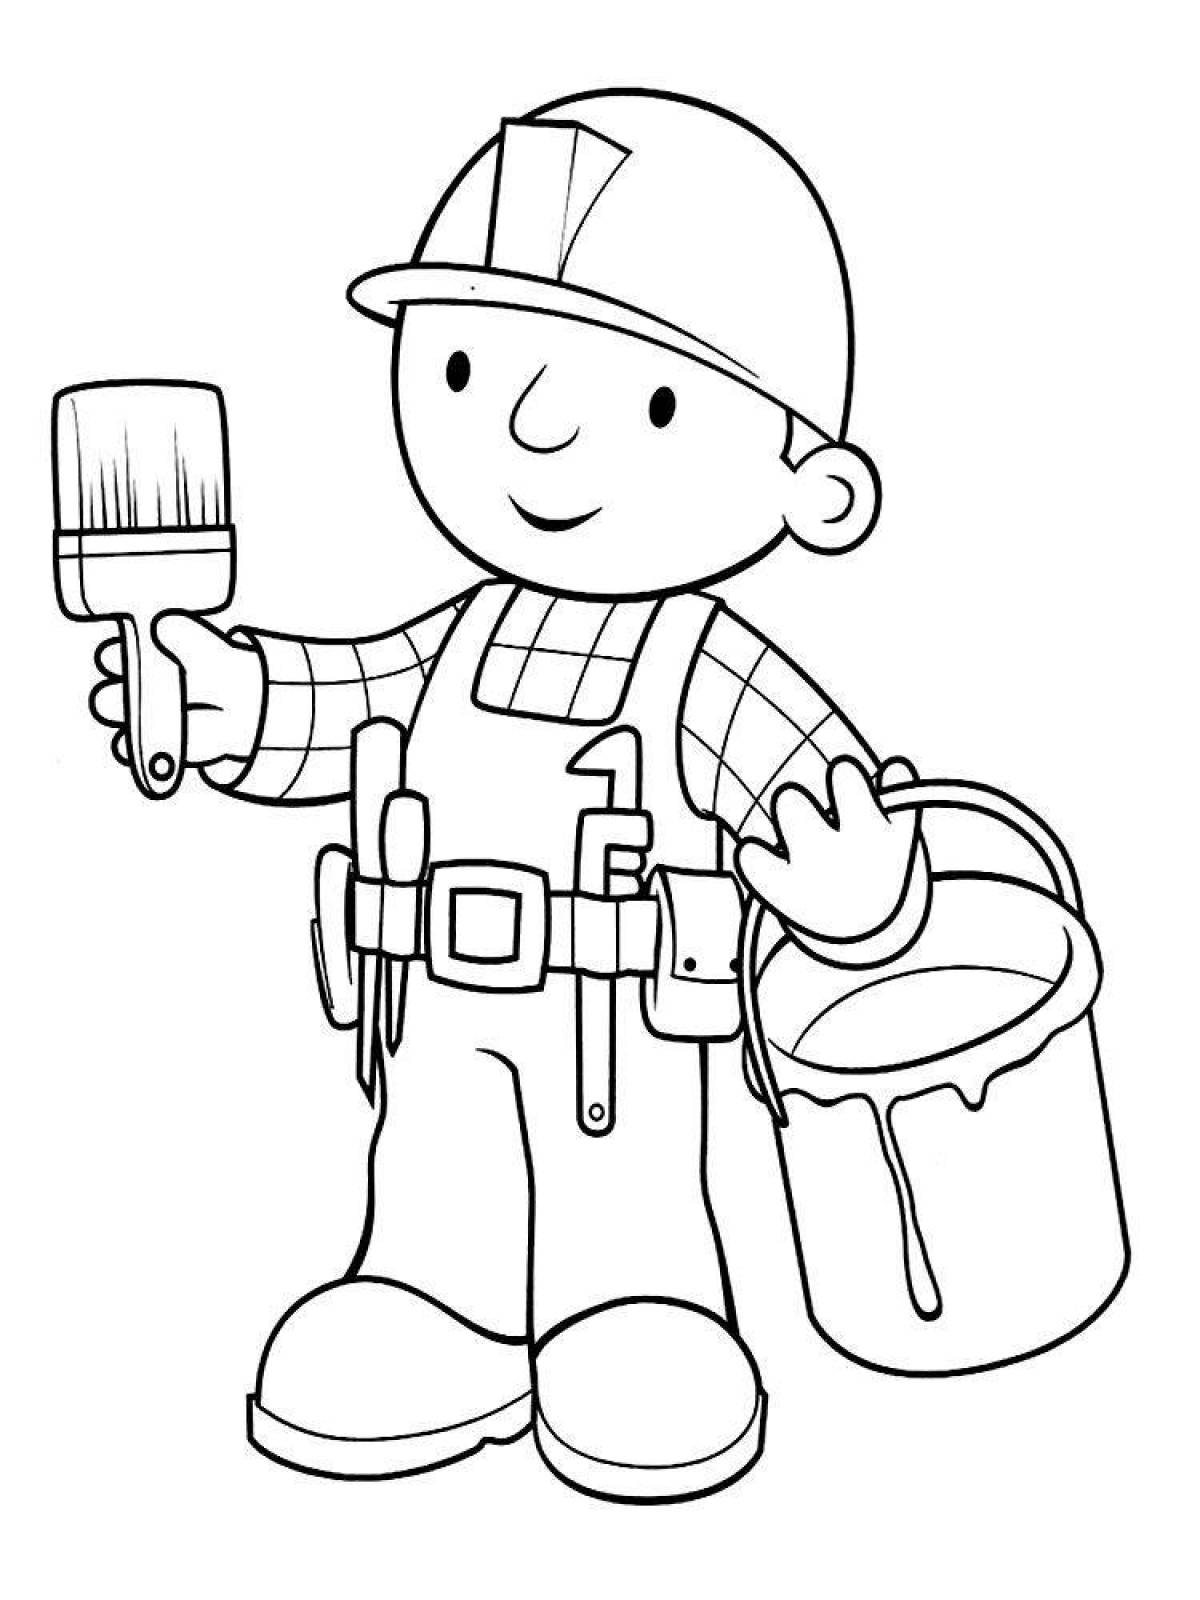 Colorful profession coloring book for children 6-7 years old